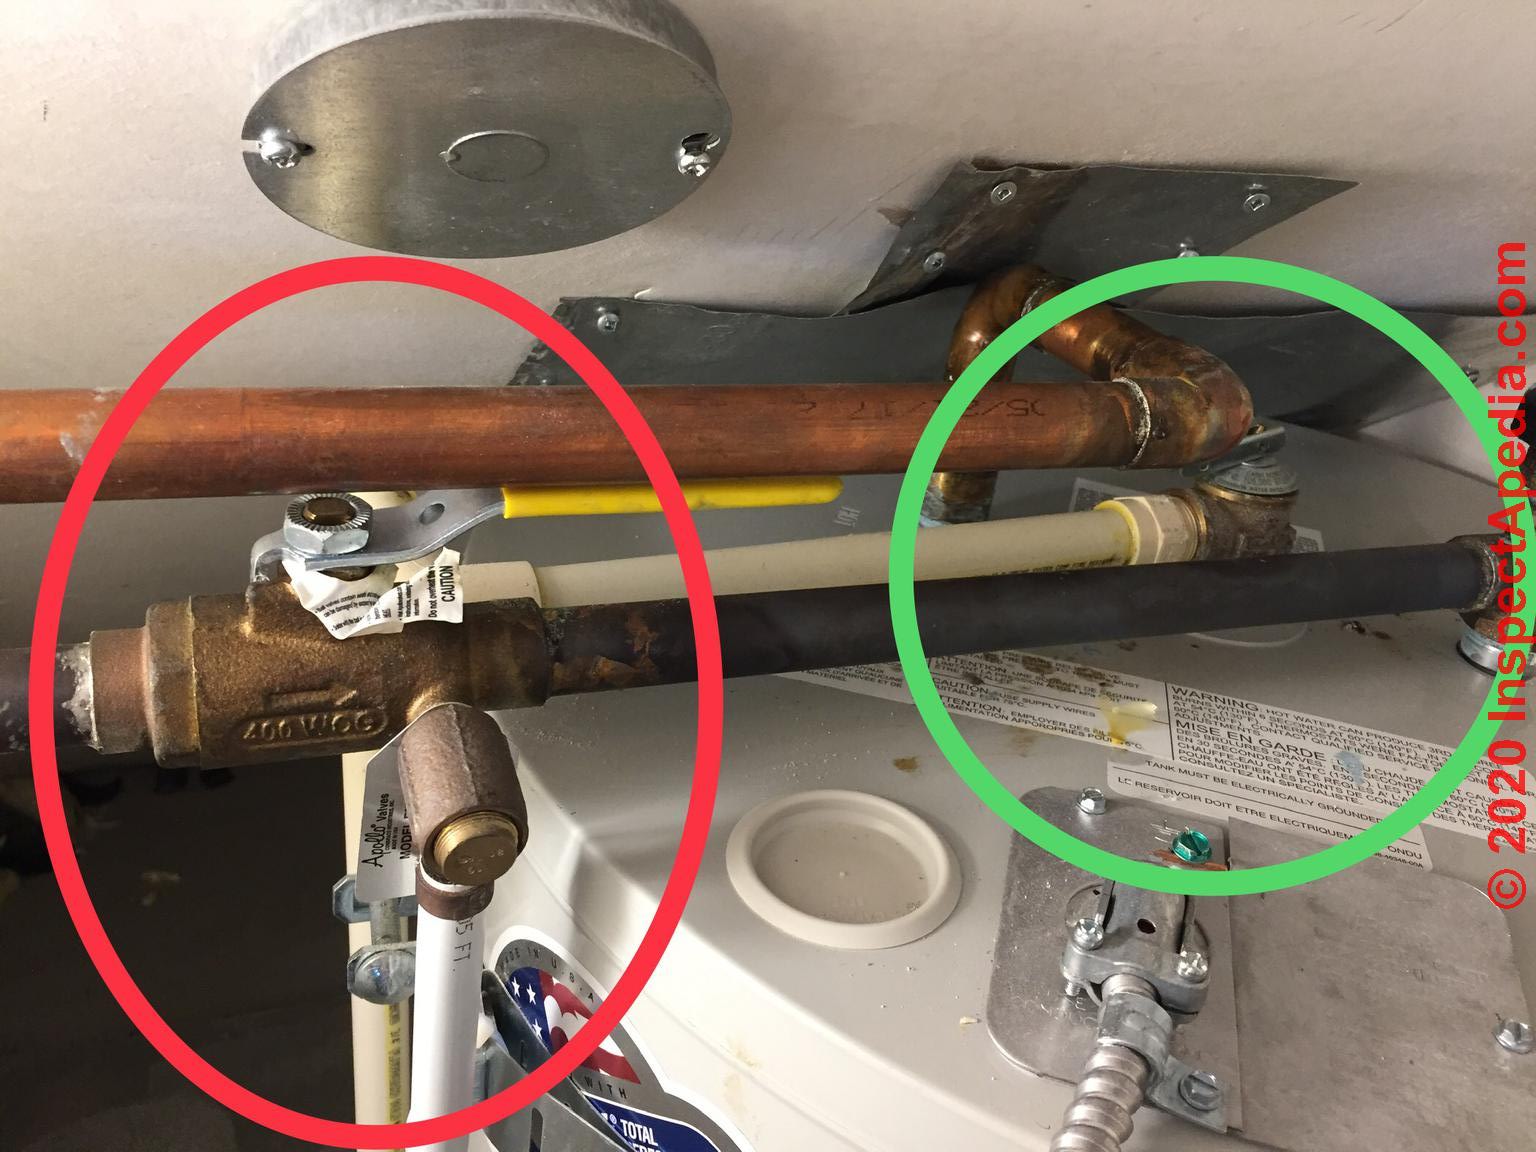 17 Things You Need To Know About A Broken Hot Water Heater Shutoff